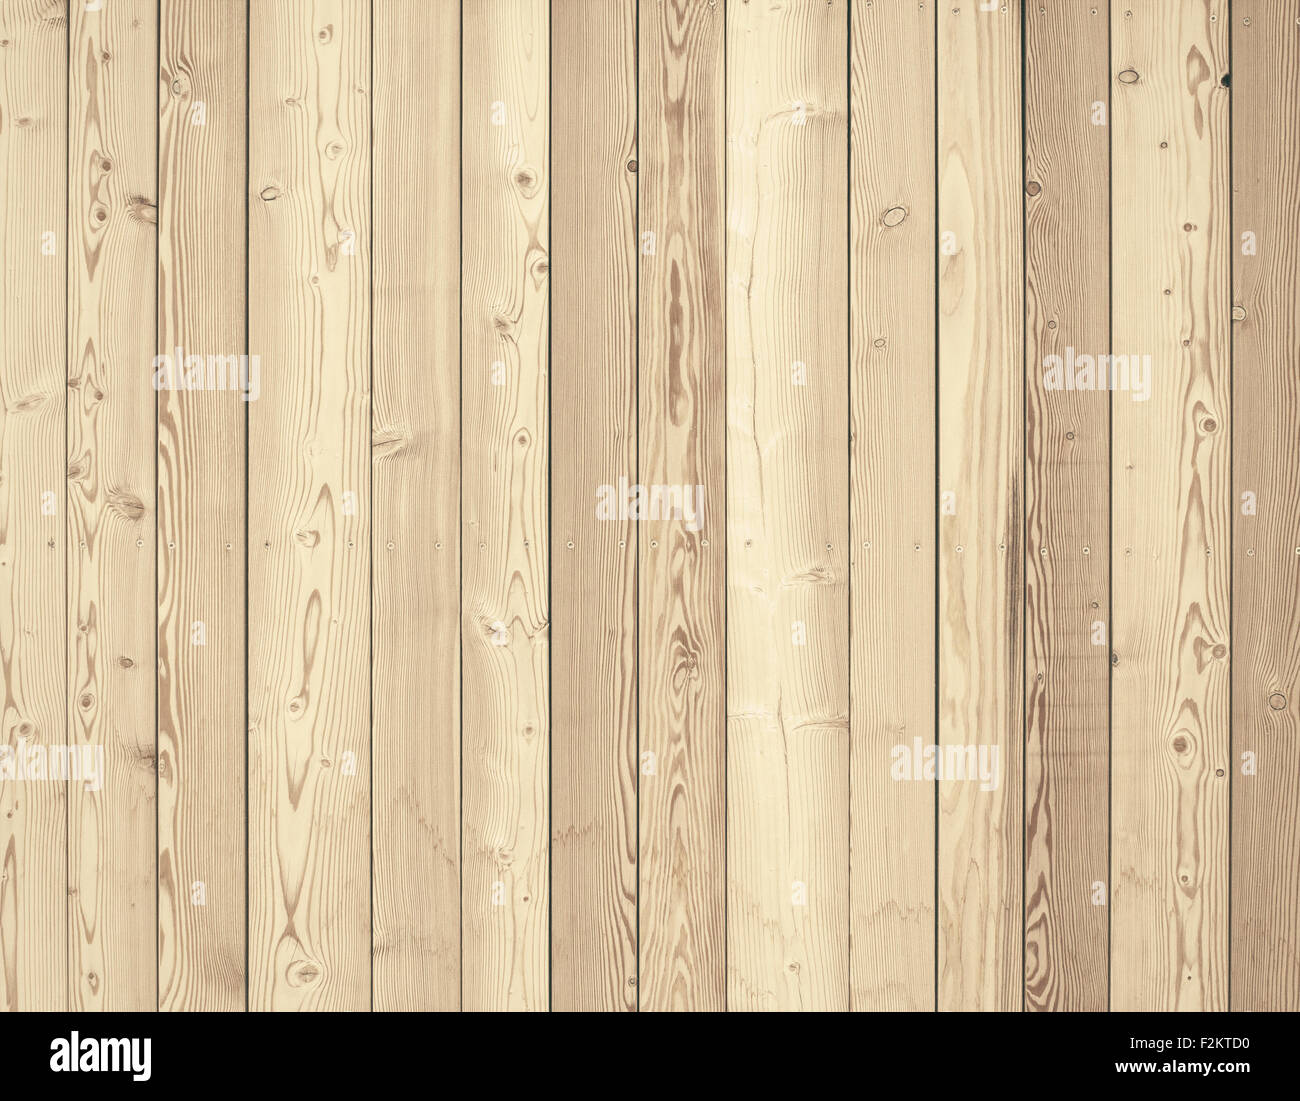 Light wooden texture with planks, table, desk or wall surface Stock Photo